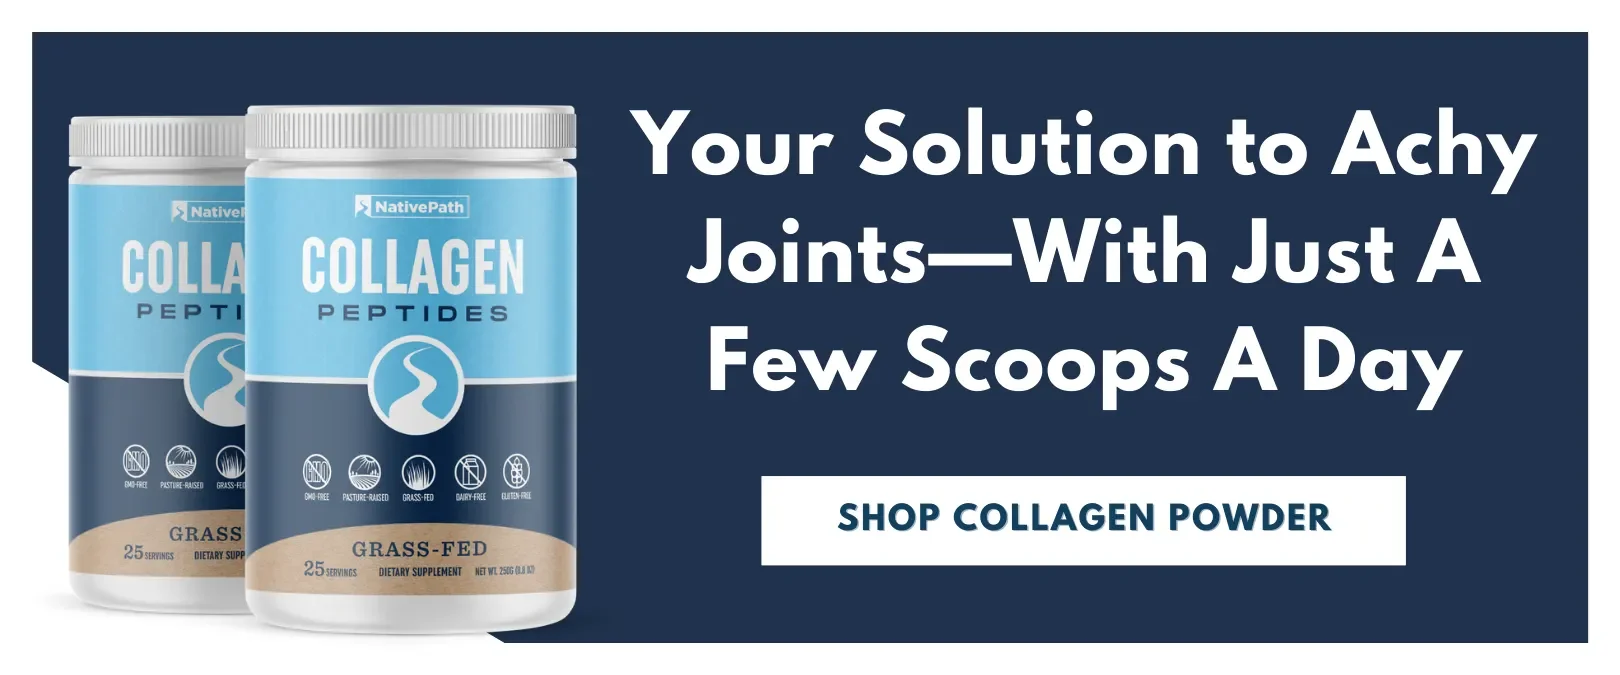 Your Solution to Achy Joints With Just A Few Scoops Of NativePath Collagen Powder A Day